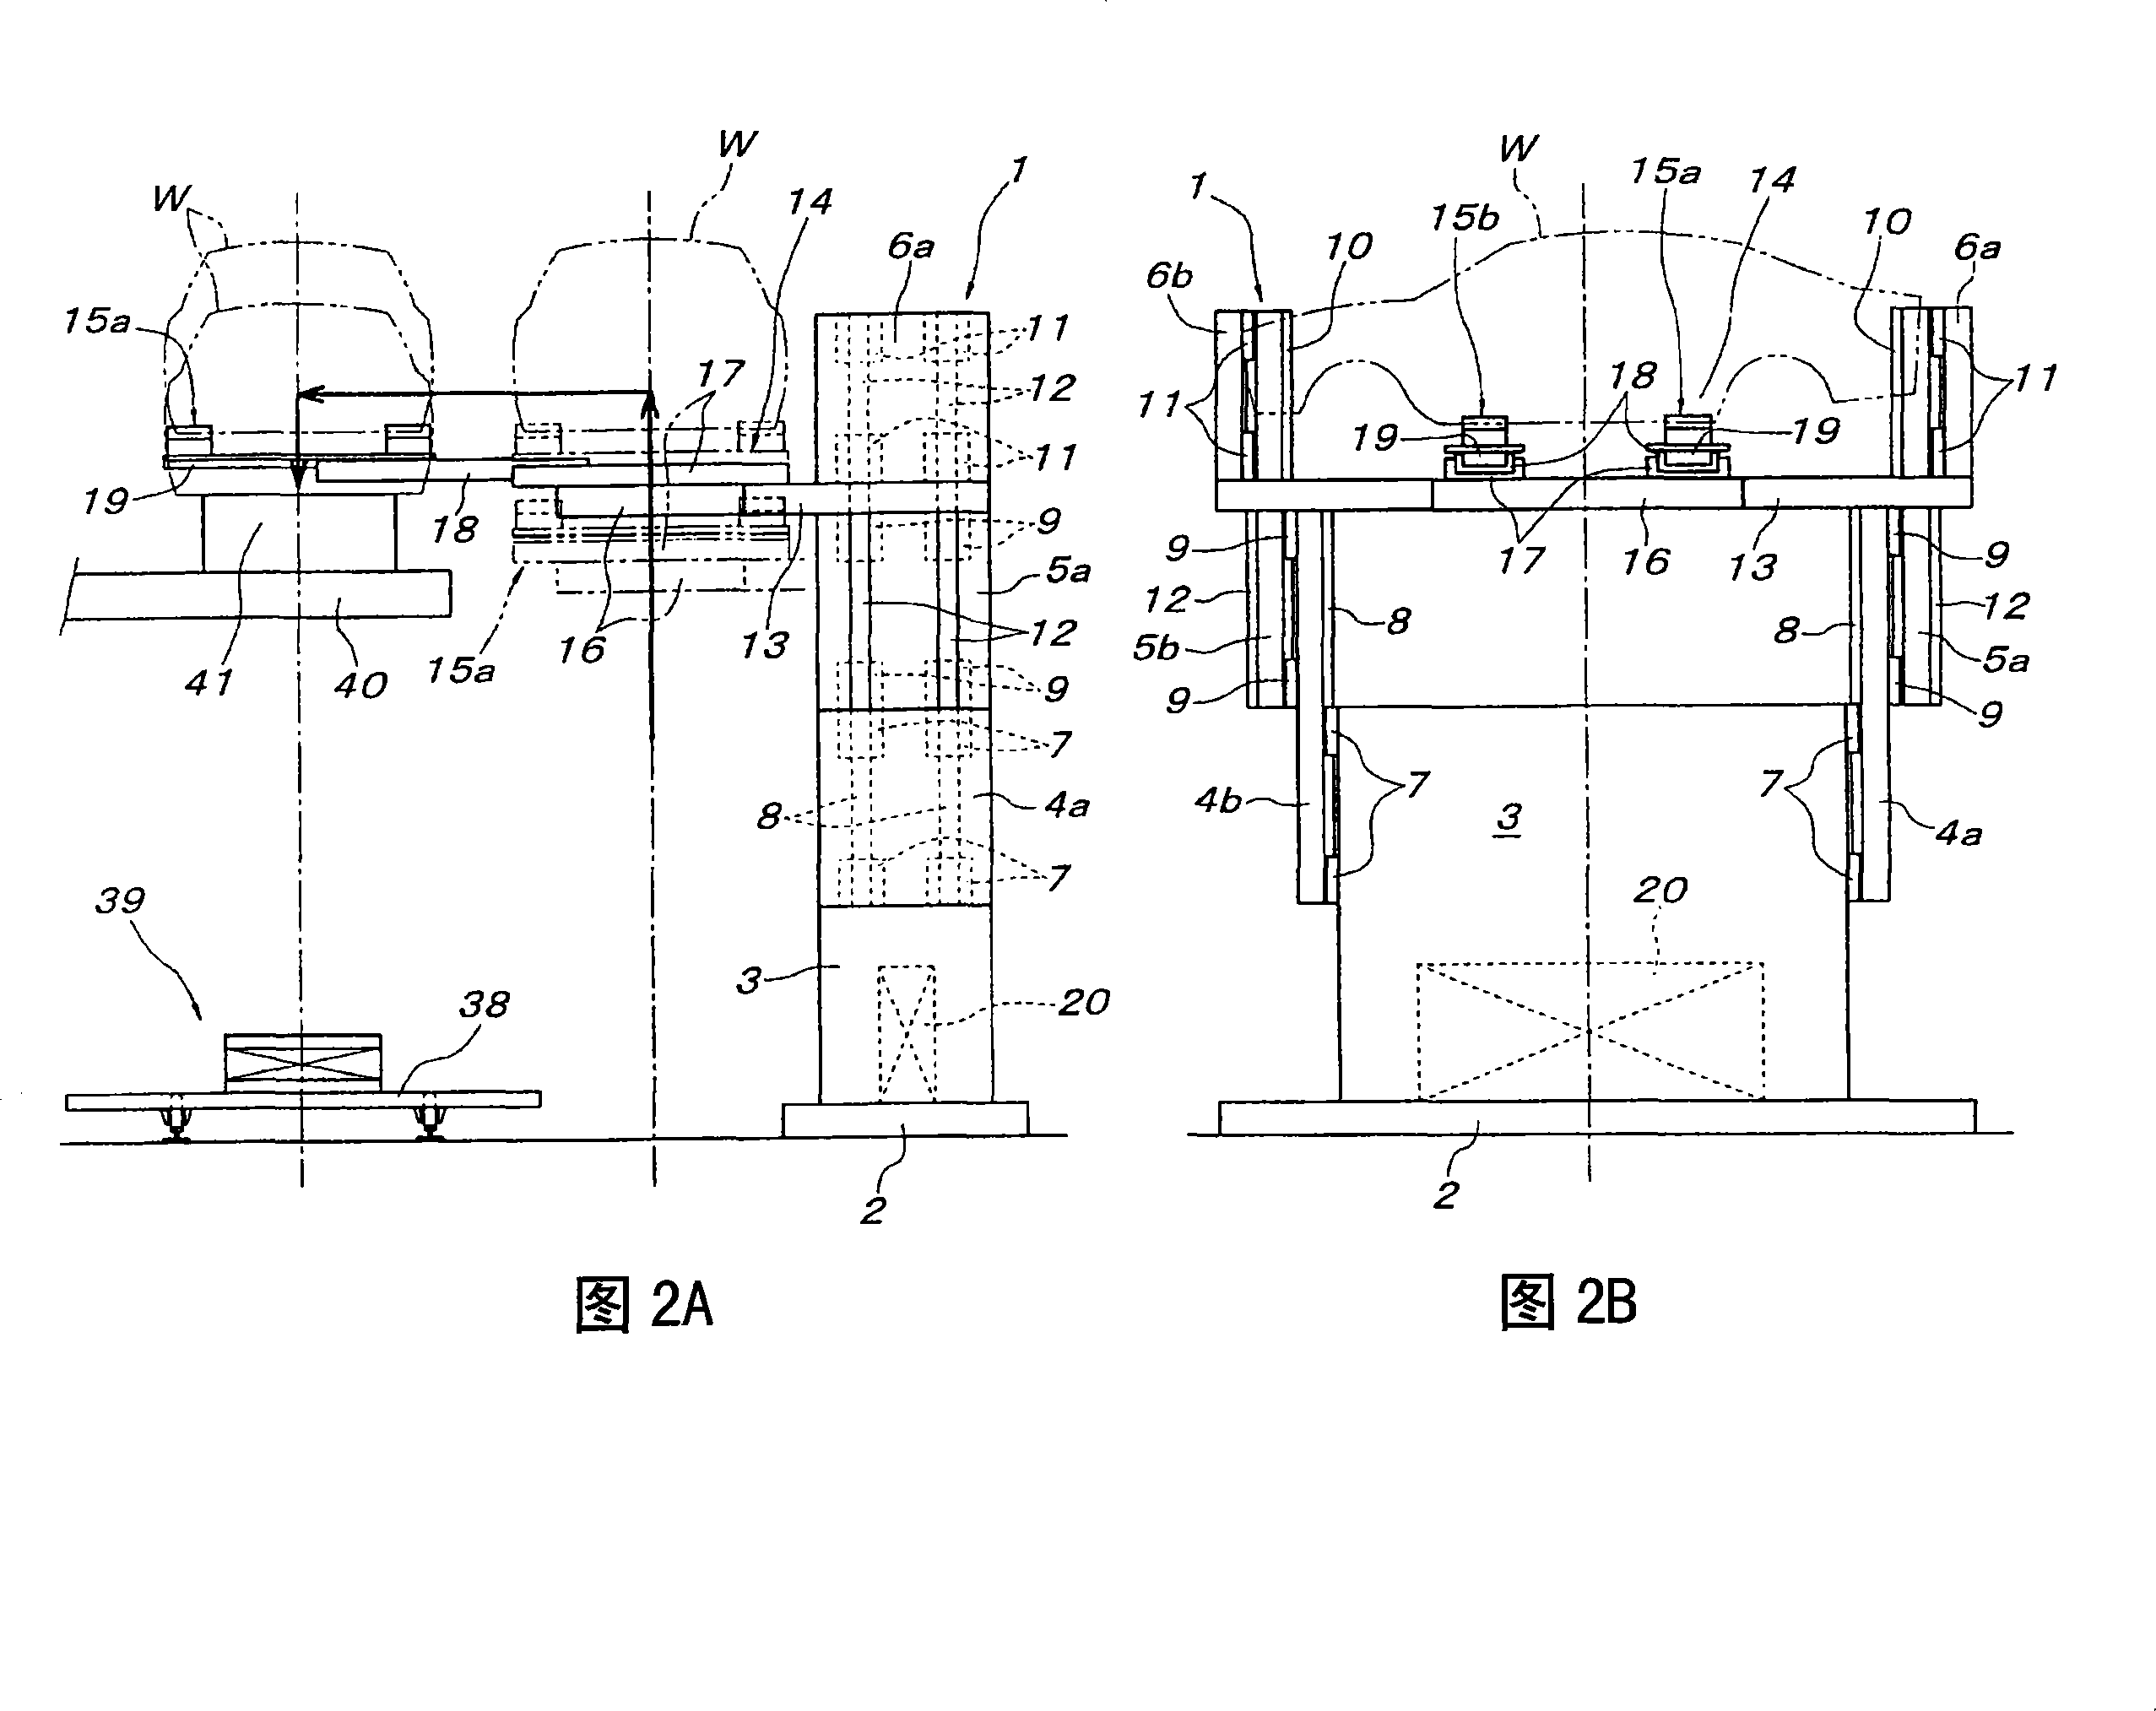 Elevating conveyance device